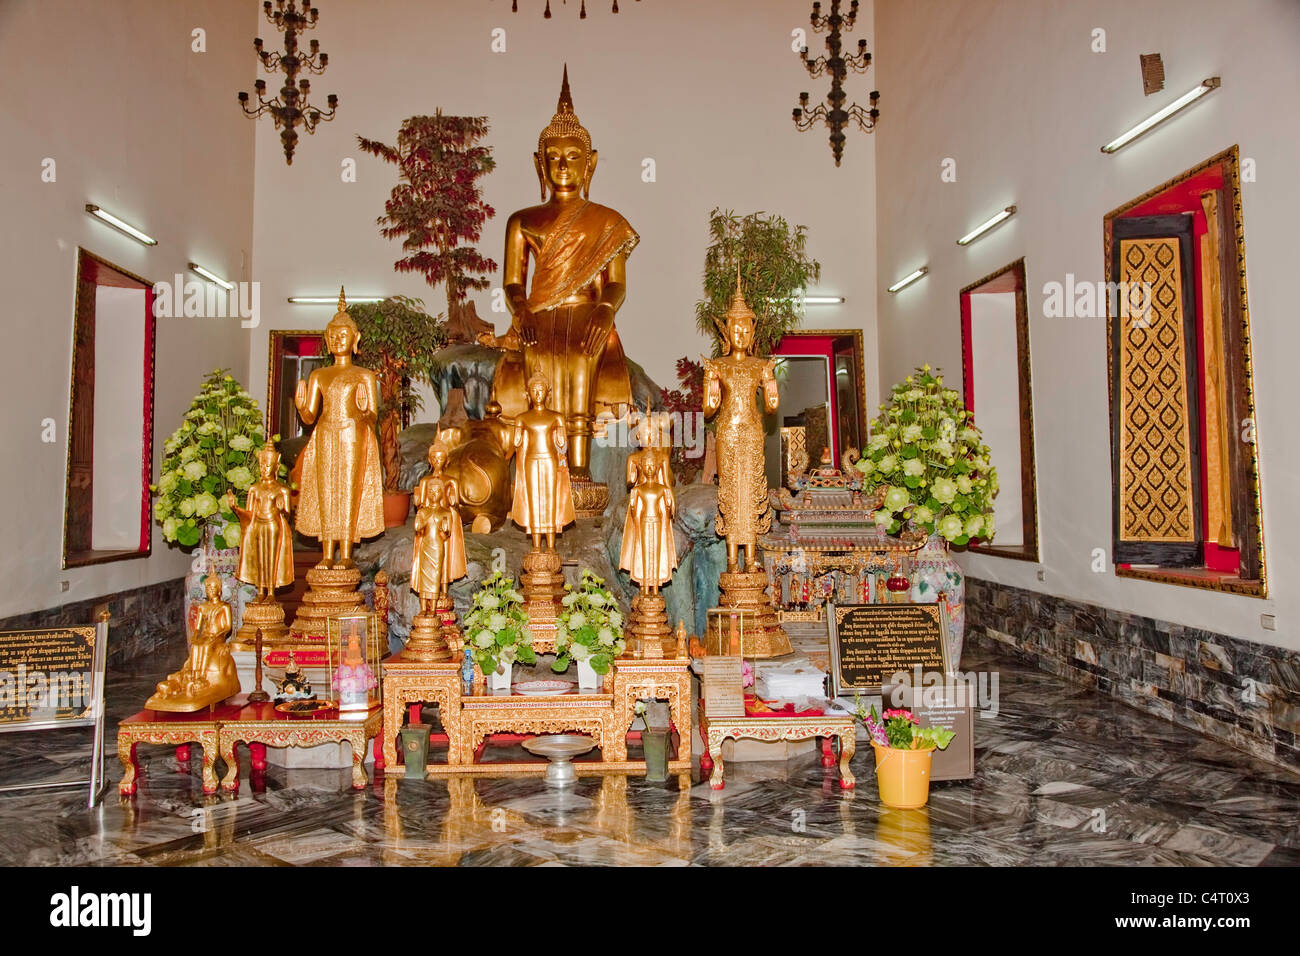 Wat Pro Temple;Bangkok's Largest and oldest Temple,Thailand Stock Photo